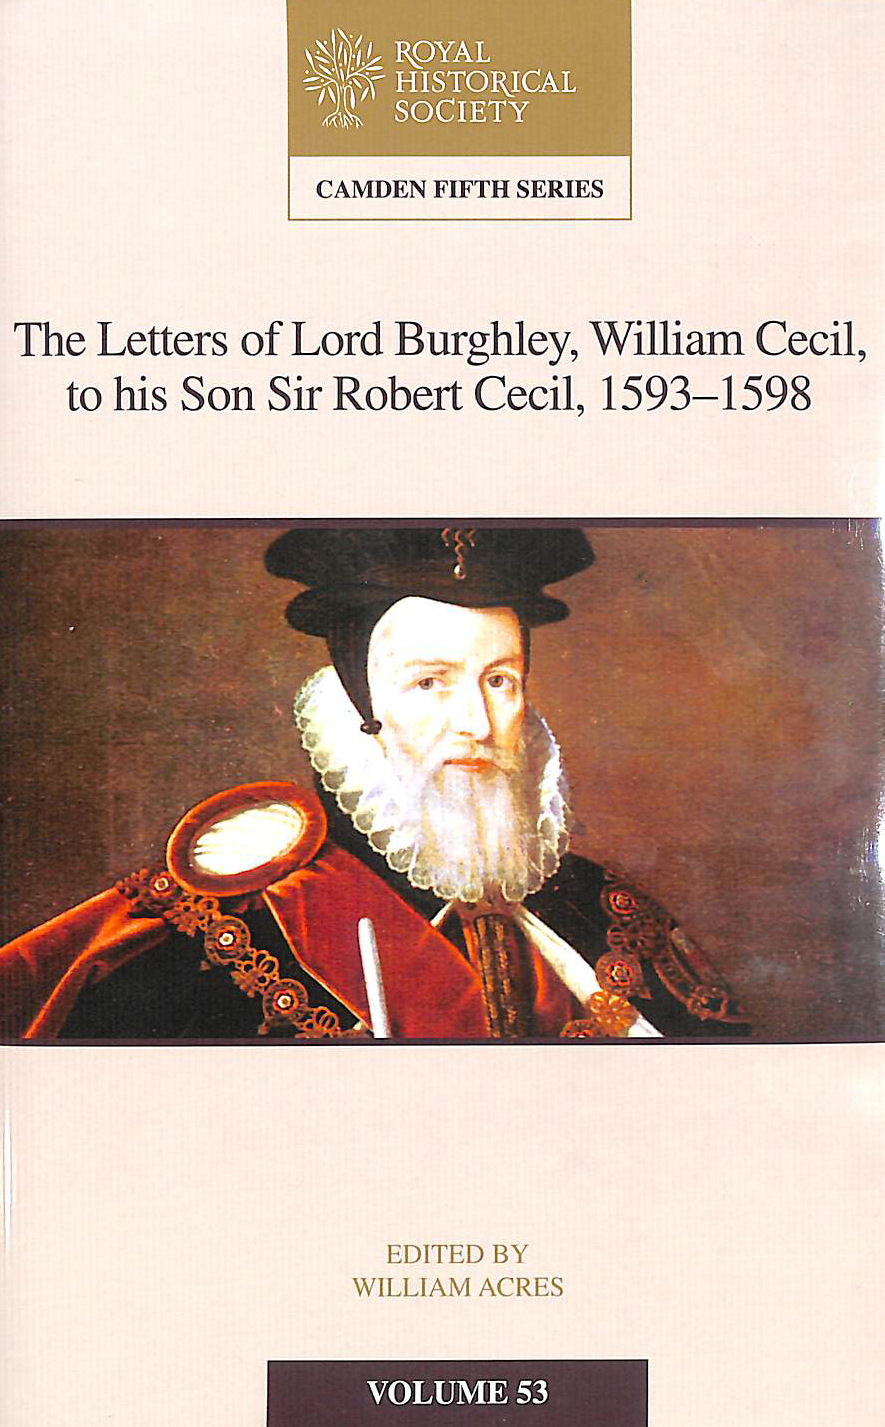 ACRES, WILLIAM [EDITOR] - The Letters of Lord Burghley, William Cecil, to His Son Sir Robert Cecil, 1593-1598: 53 (Camden Fifth Series, Series Number 53)